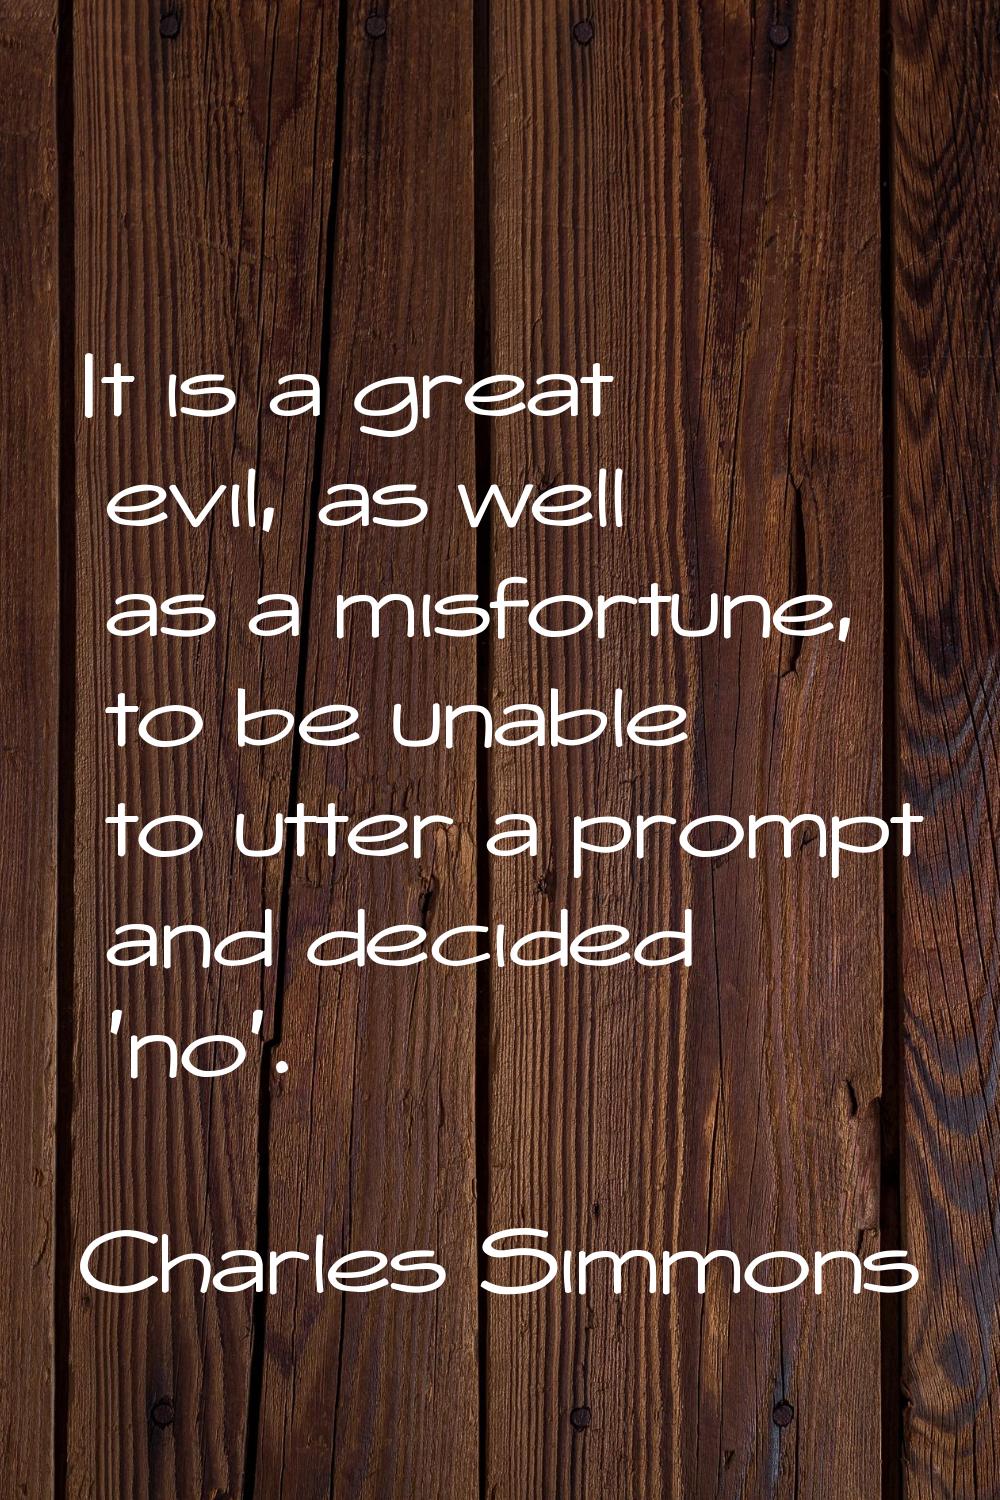 It is a great evil, as well as a misfortune, to be unable to utter a prompt and decided 'no'.